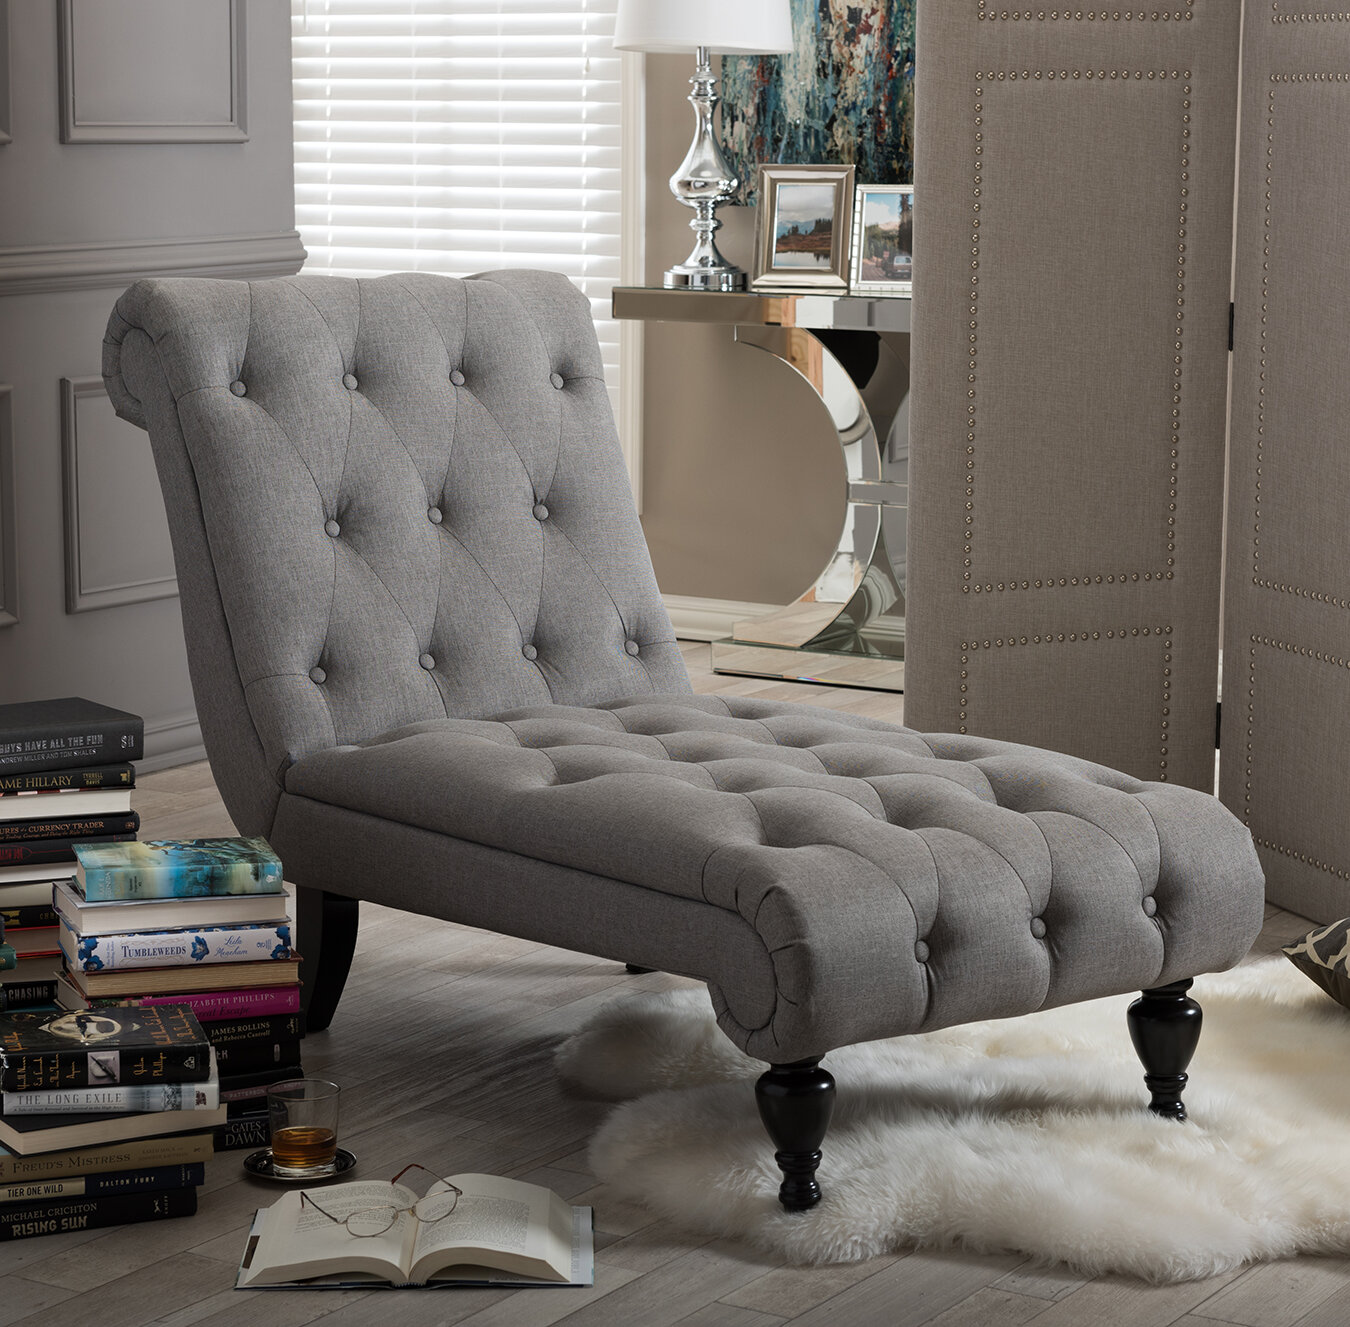 Colegrove Upholstered Chaise Lounge